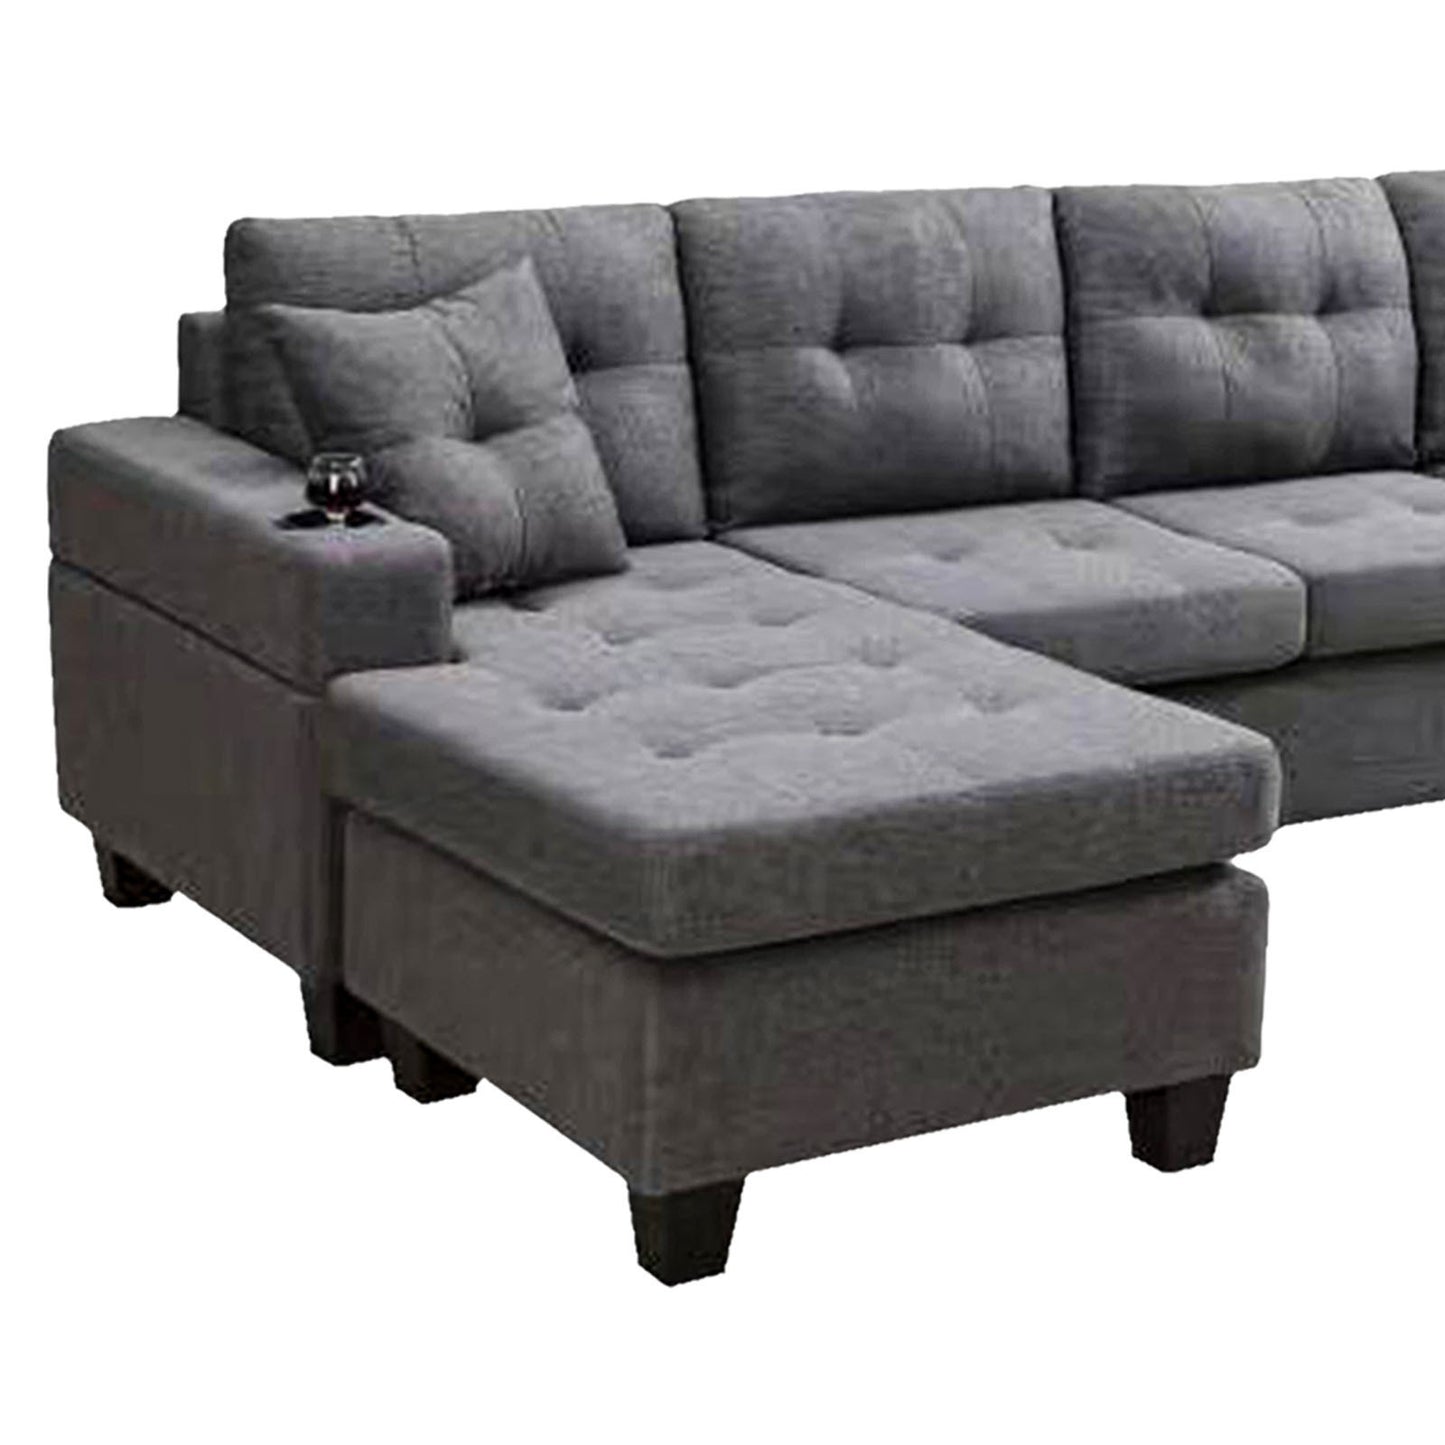 sectional sofa left with footrest, convertible corner sofa with armrest storage, sectional sofa for living room and apartment, chaise longue left (grey)